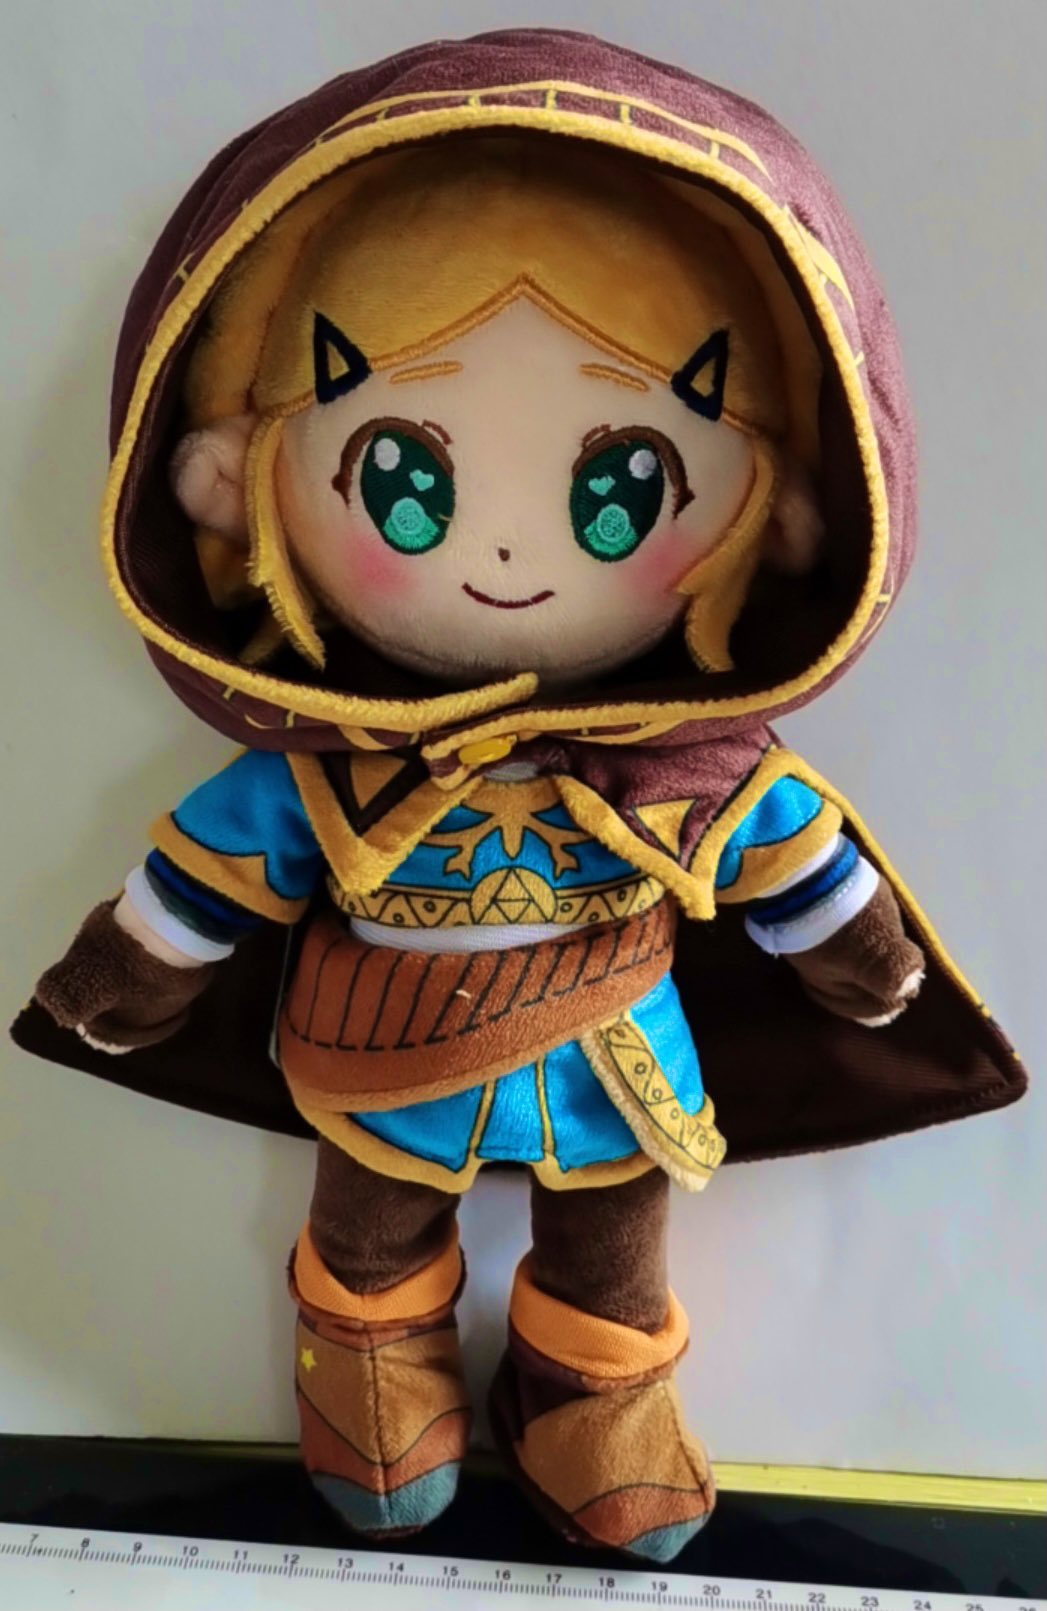 ☕️ 𝓙𝓾𝓹𝔂 🌱 ペパアオ命 🌱 on X: 💕ZELDA INSPIRED PLUSH FINAL PROTOTYPE!💕  She's finished! Complete with removable hood, Zelda is ready to go on many  adventures with you. Will you bring her